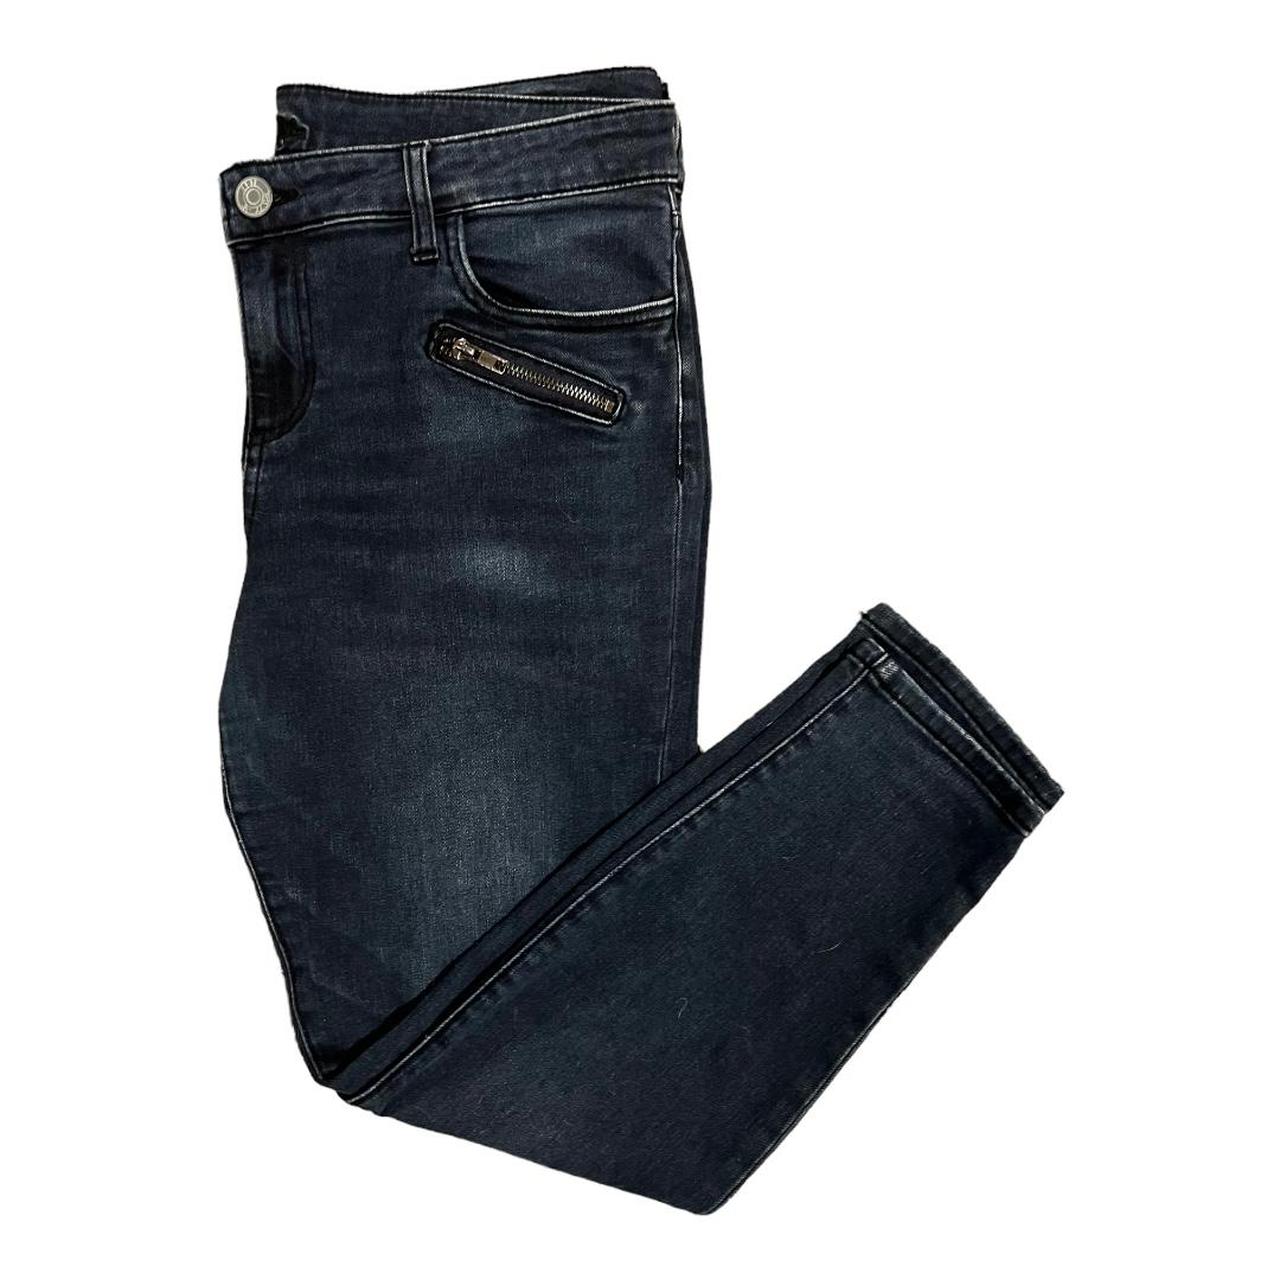 Kut from the Kloth Women's Navy and Blue Jeans (2)